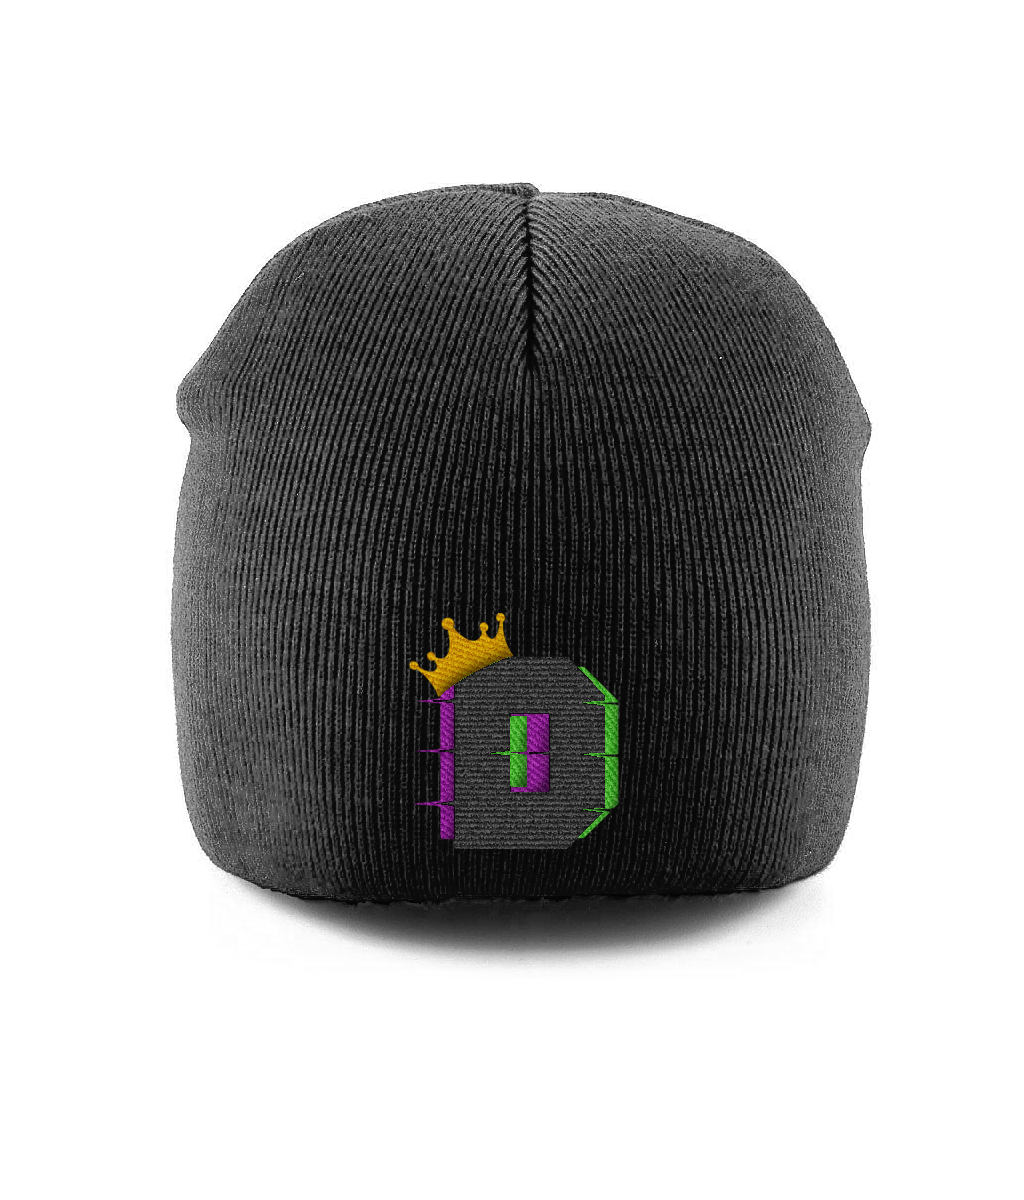 The King D42 Pull-On Beanie